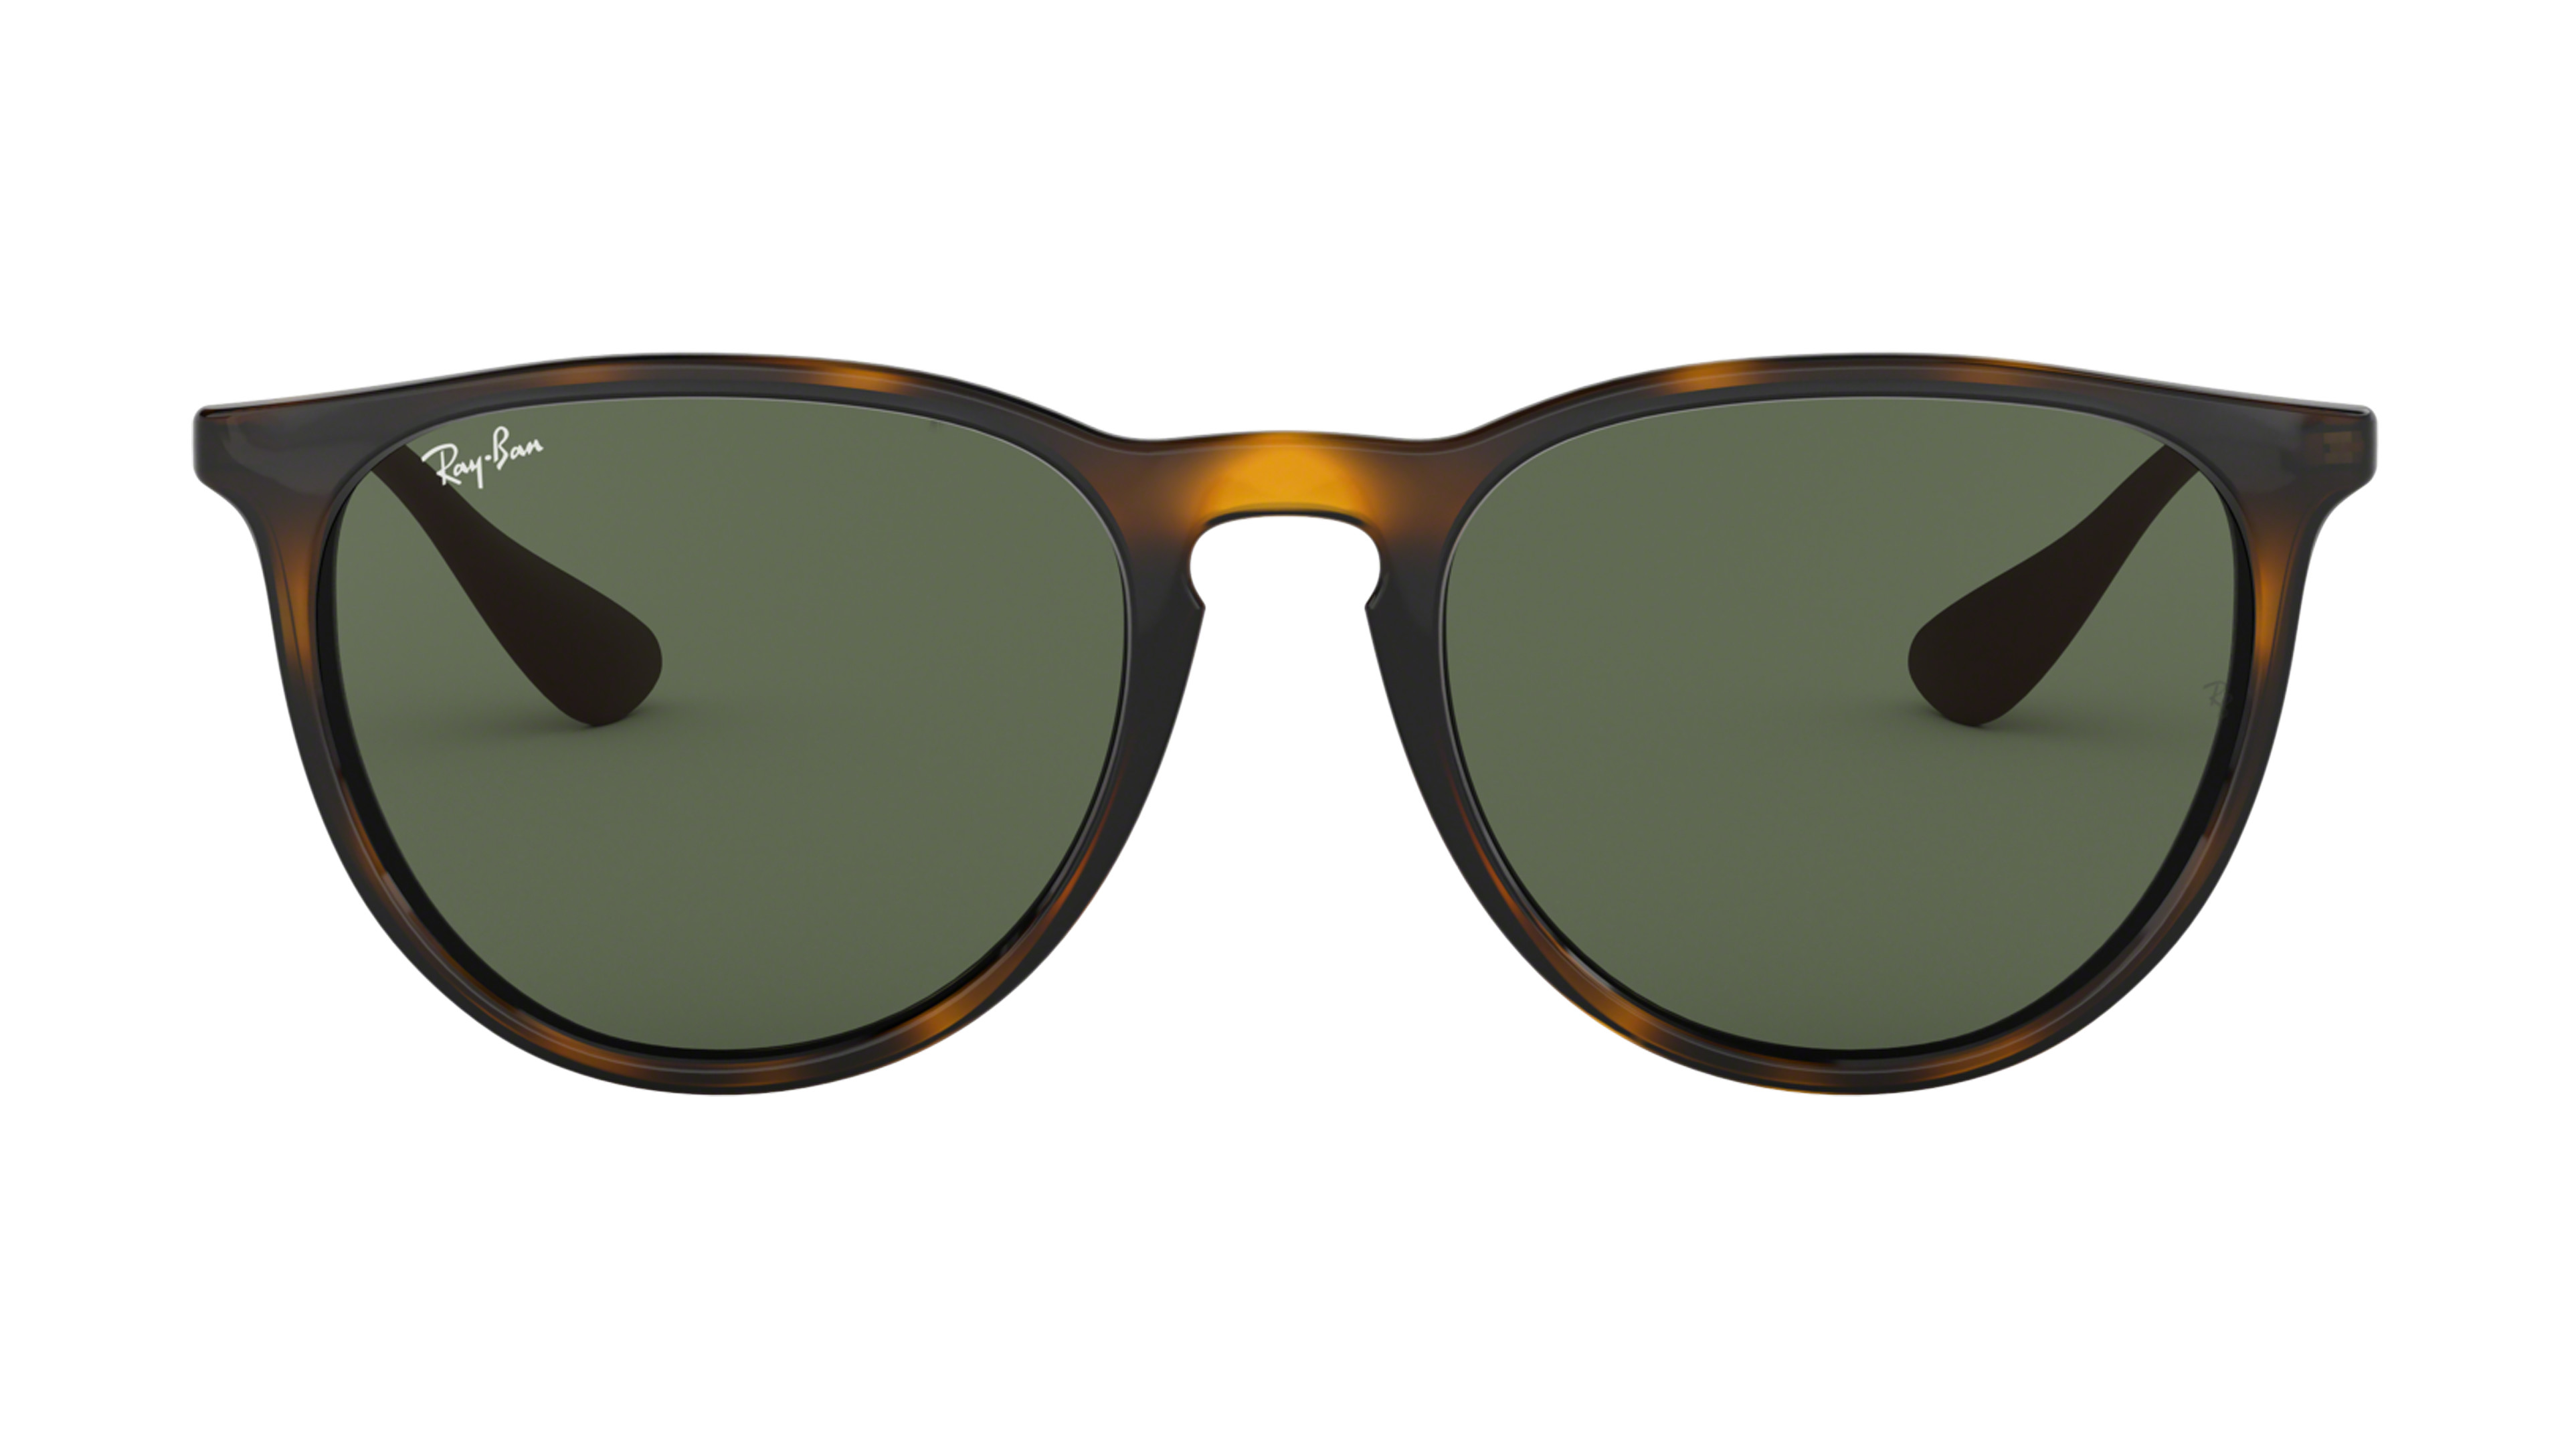 [products.image.front] Ray-Ban ERIKA 0RB4171 710/71 Sonnenbrille